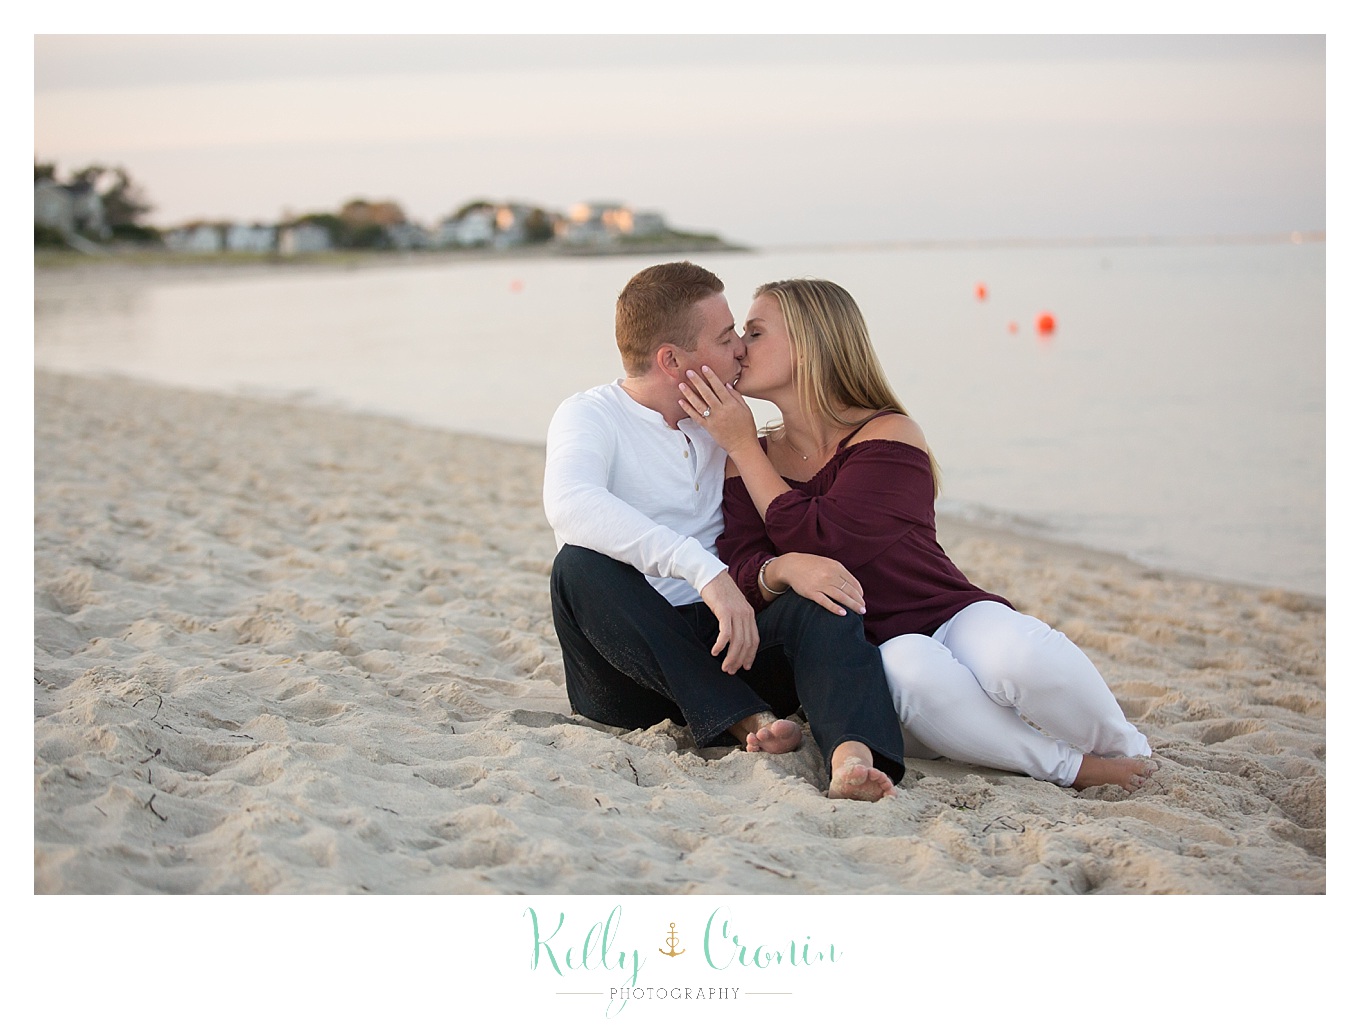 A man kisses his fiance | Kelly Cronin Photography | Cape Cod Engagement Photographer